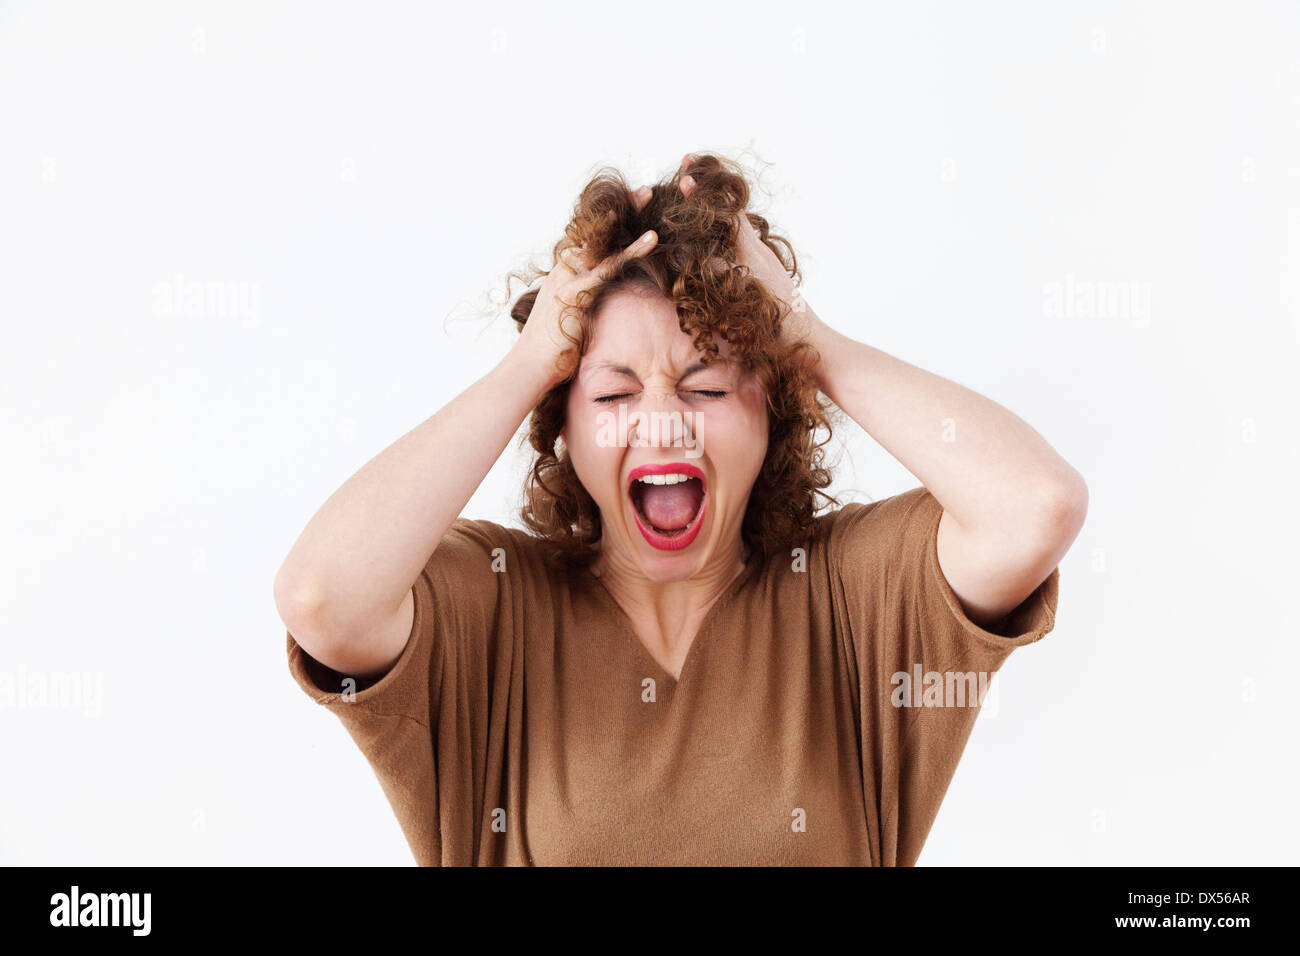 Screaming young woman tearing at her hair Stock Photo